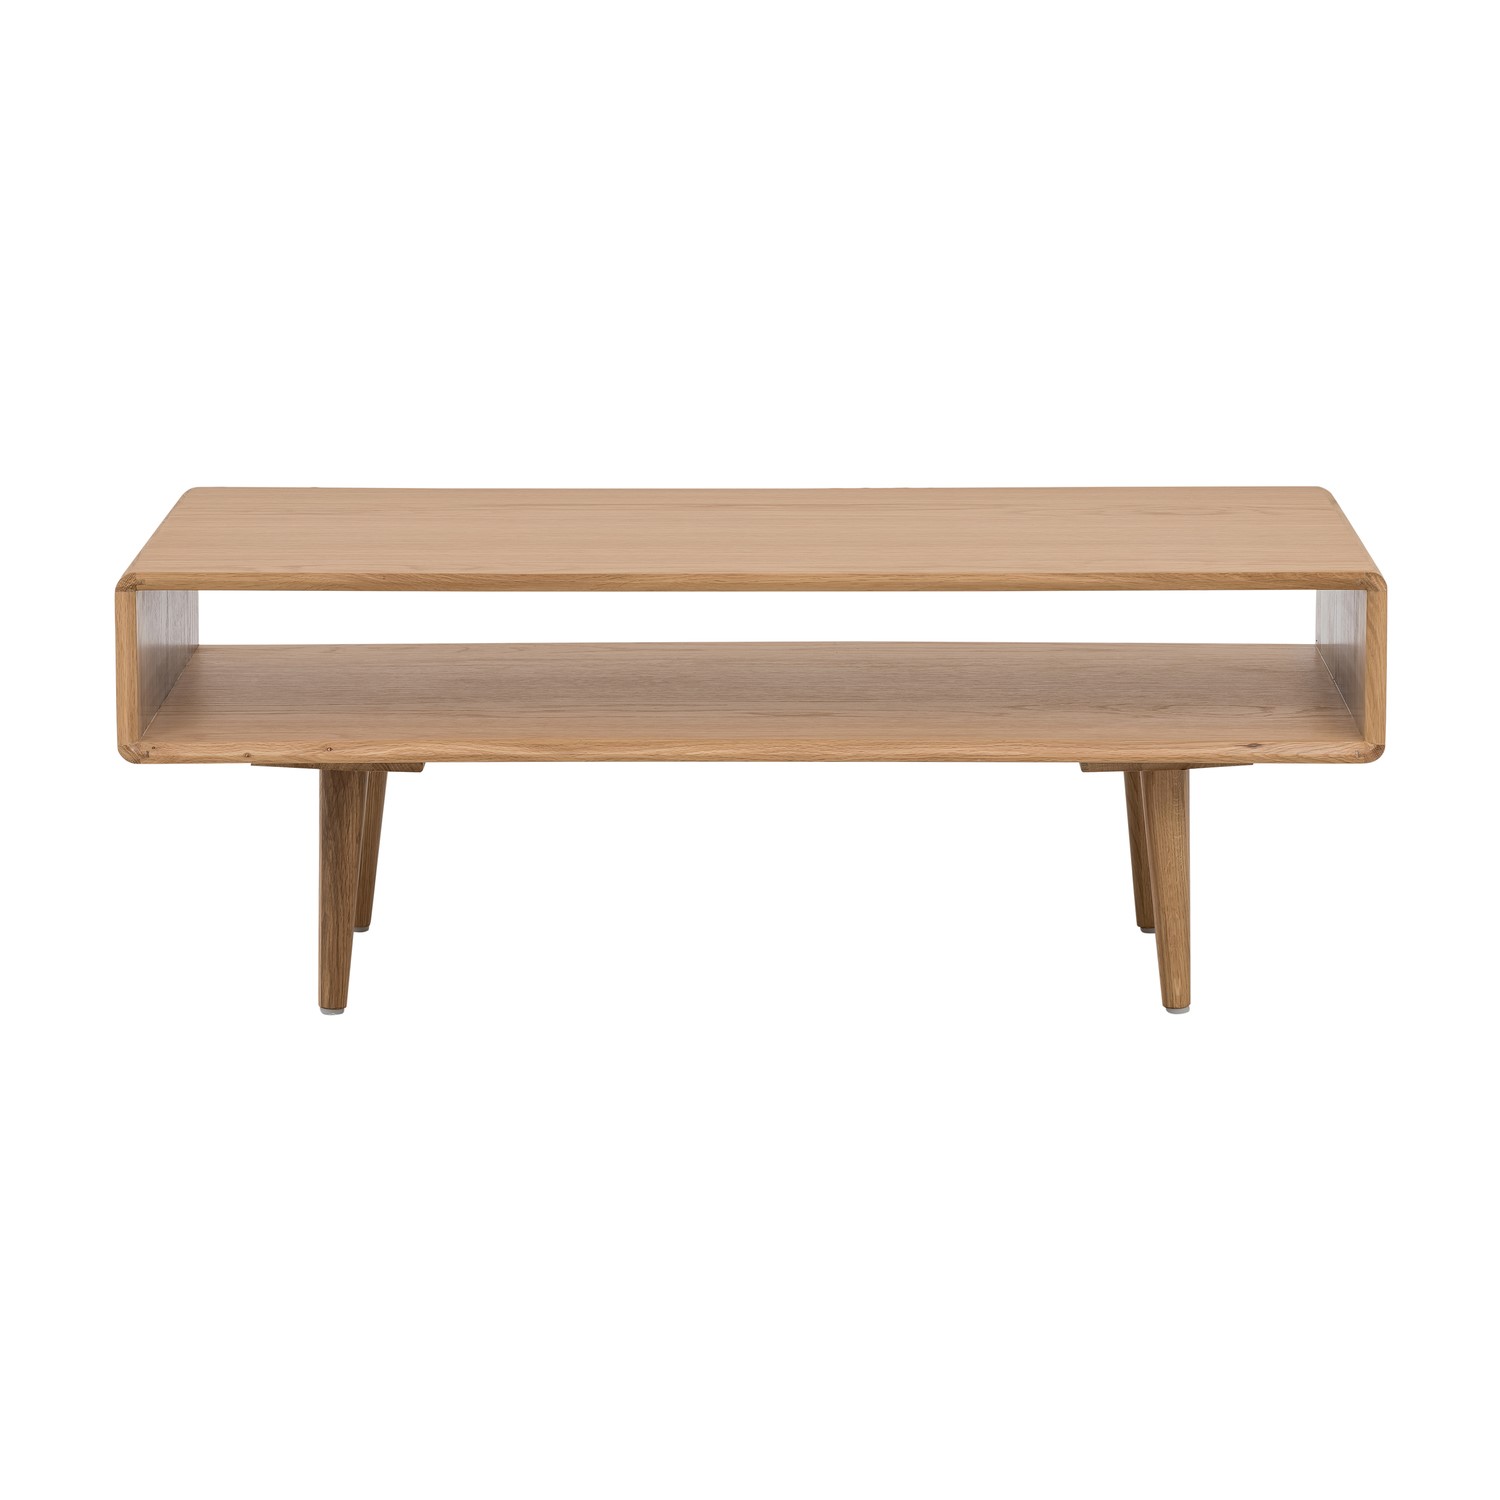 Read more about Large solid oak coffee table with storage shelf marny